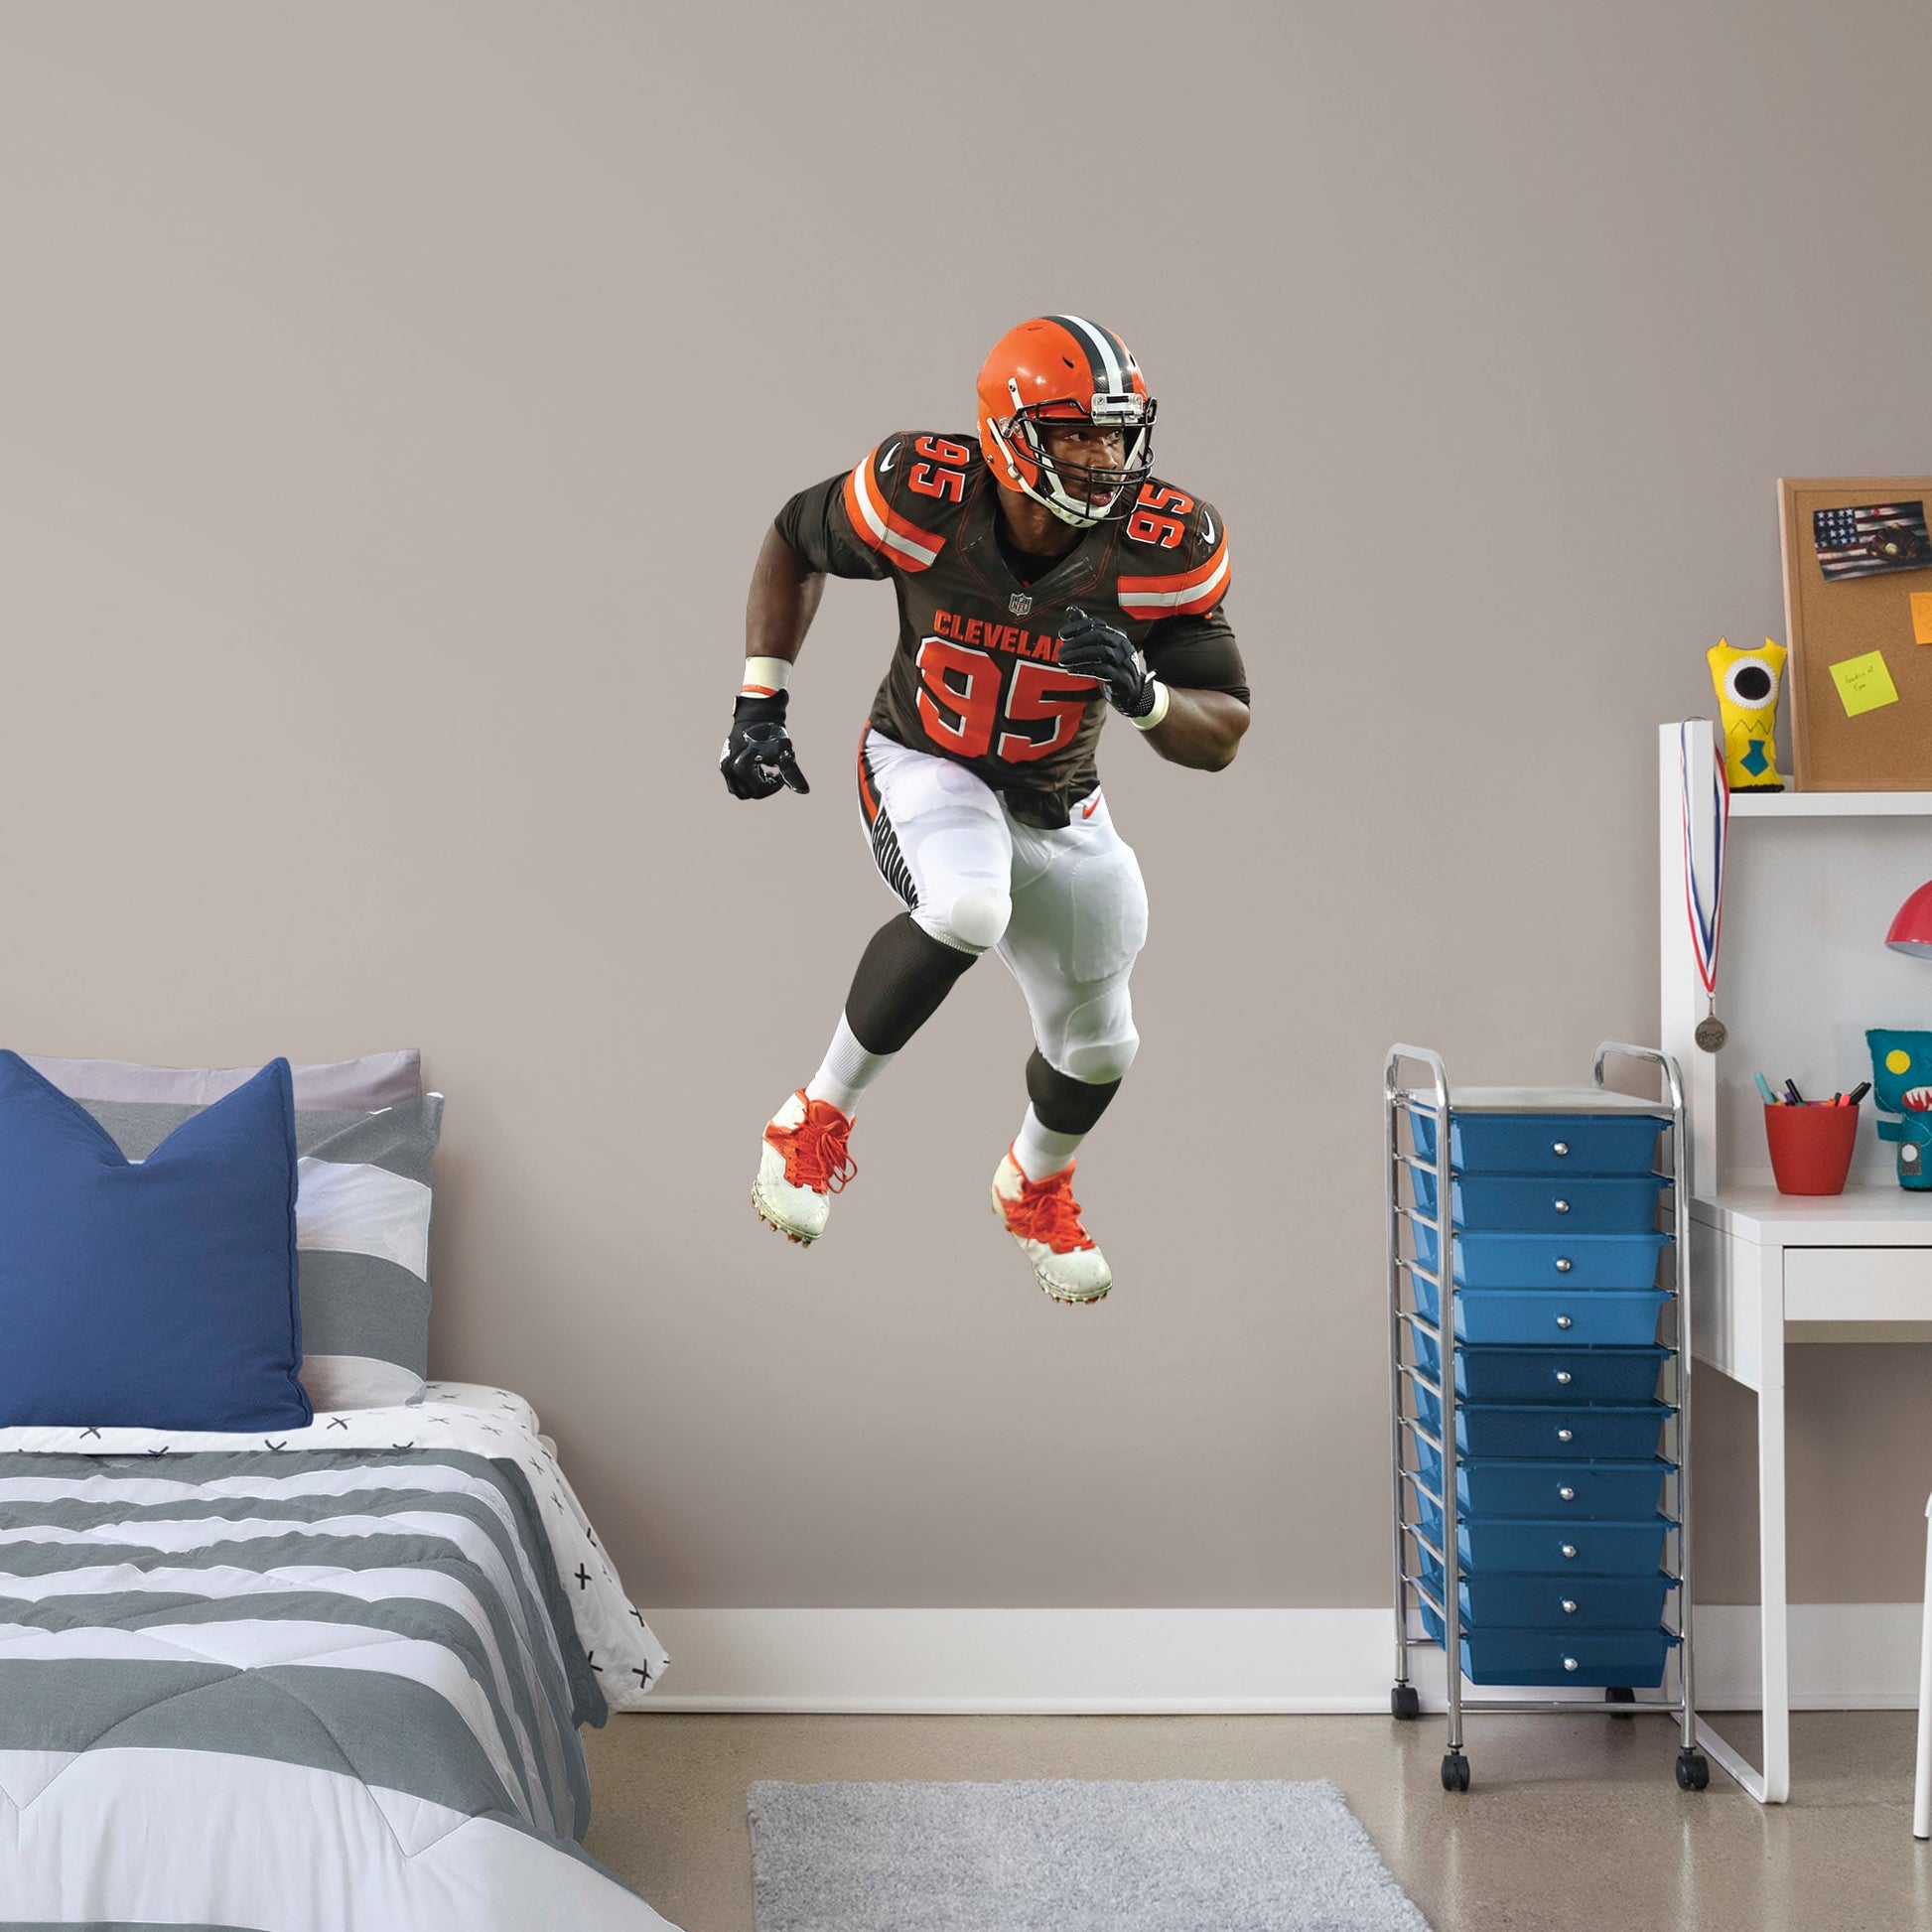 Giant Athlete + 2 Decals (27"W x 51"H) Invite Cleveland Browns defensive end Myles Garrett to your personal Dawg Pound with this durable vinyl wall decal. The 2017 first-round draft pick and 2018 Pro Bowl qualifier brings his defensive skills to your bedroom, office, and dog-friendly man cave. Browns Backers will appreciate the classic brown, white, and Cleveland orange, but you don't have to stay in Cleveland. Take this easily reusable decal on the road to wherever life takes you.